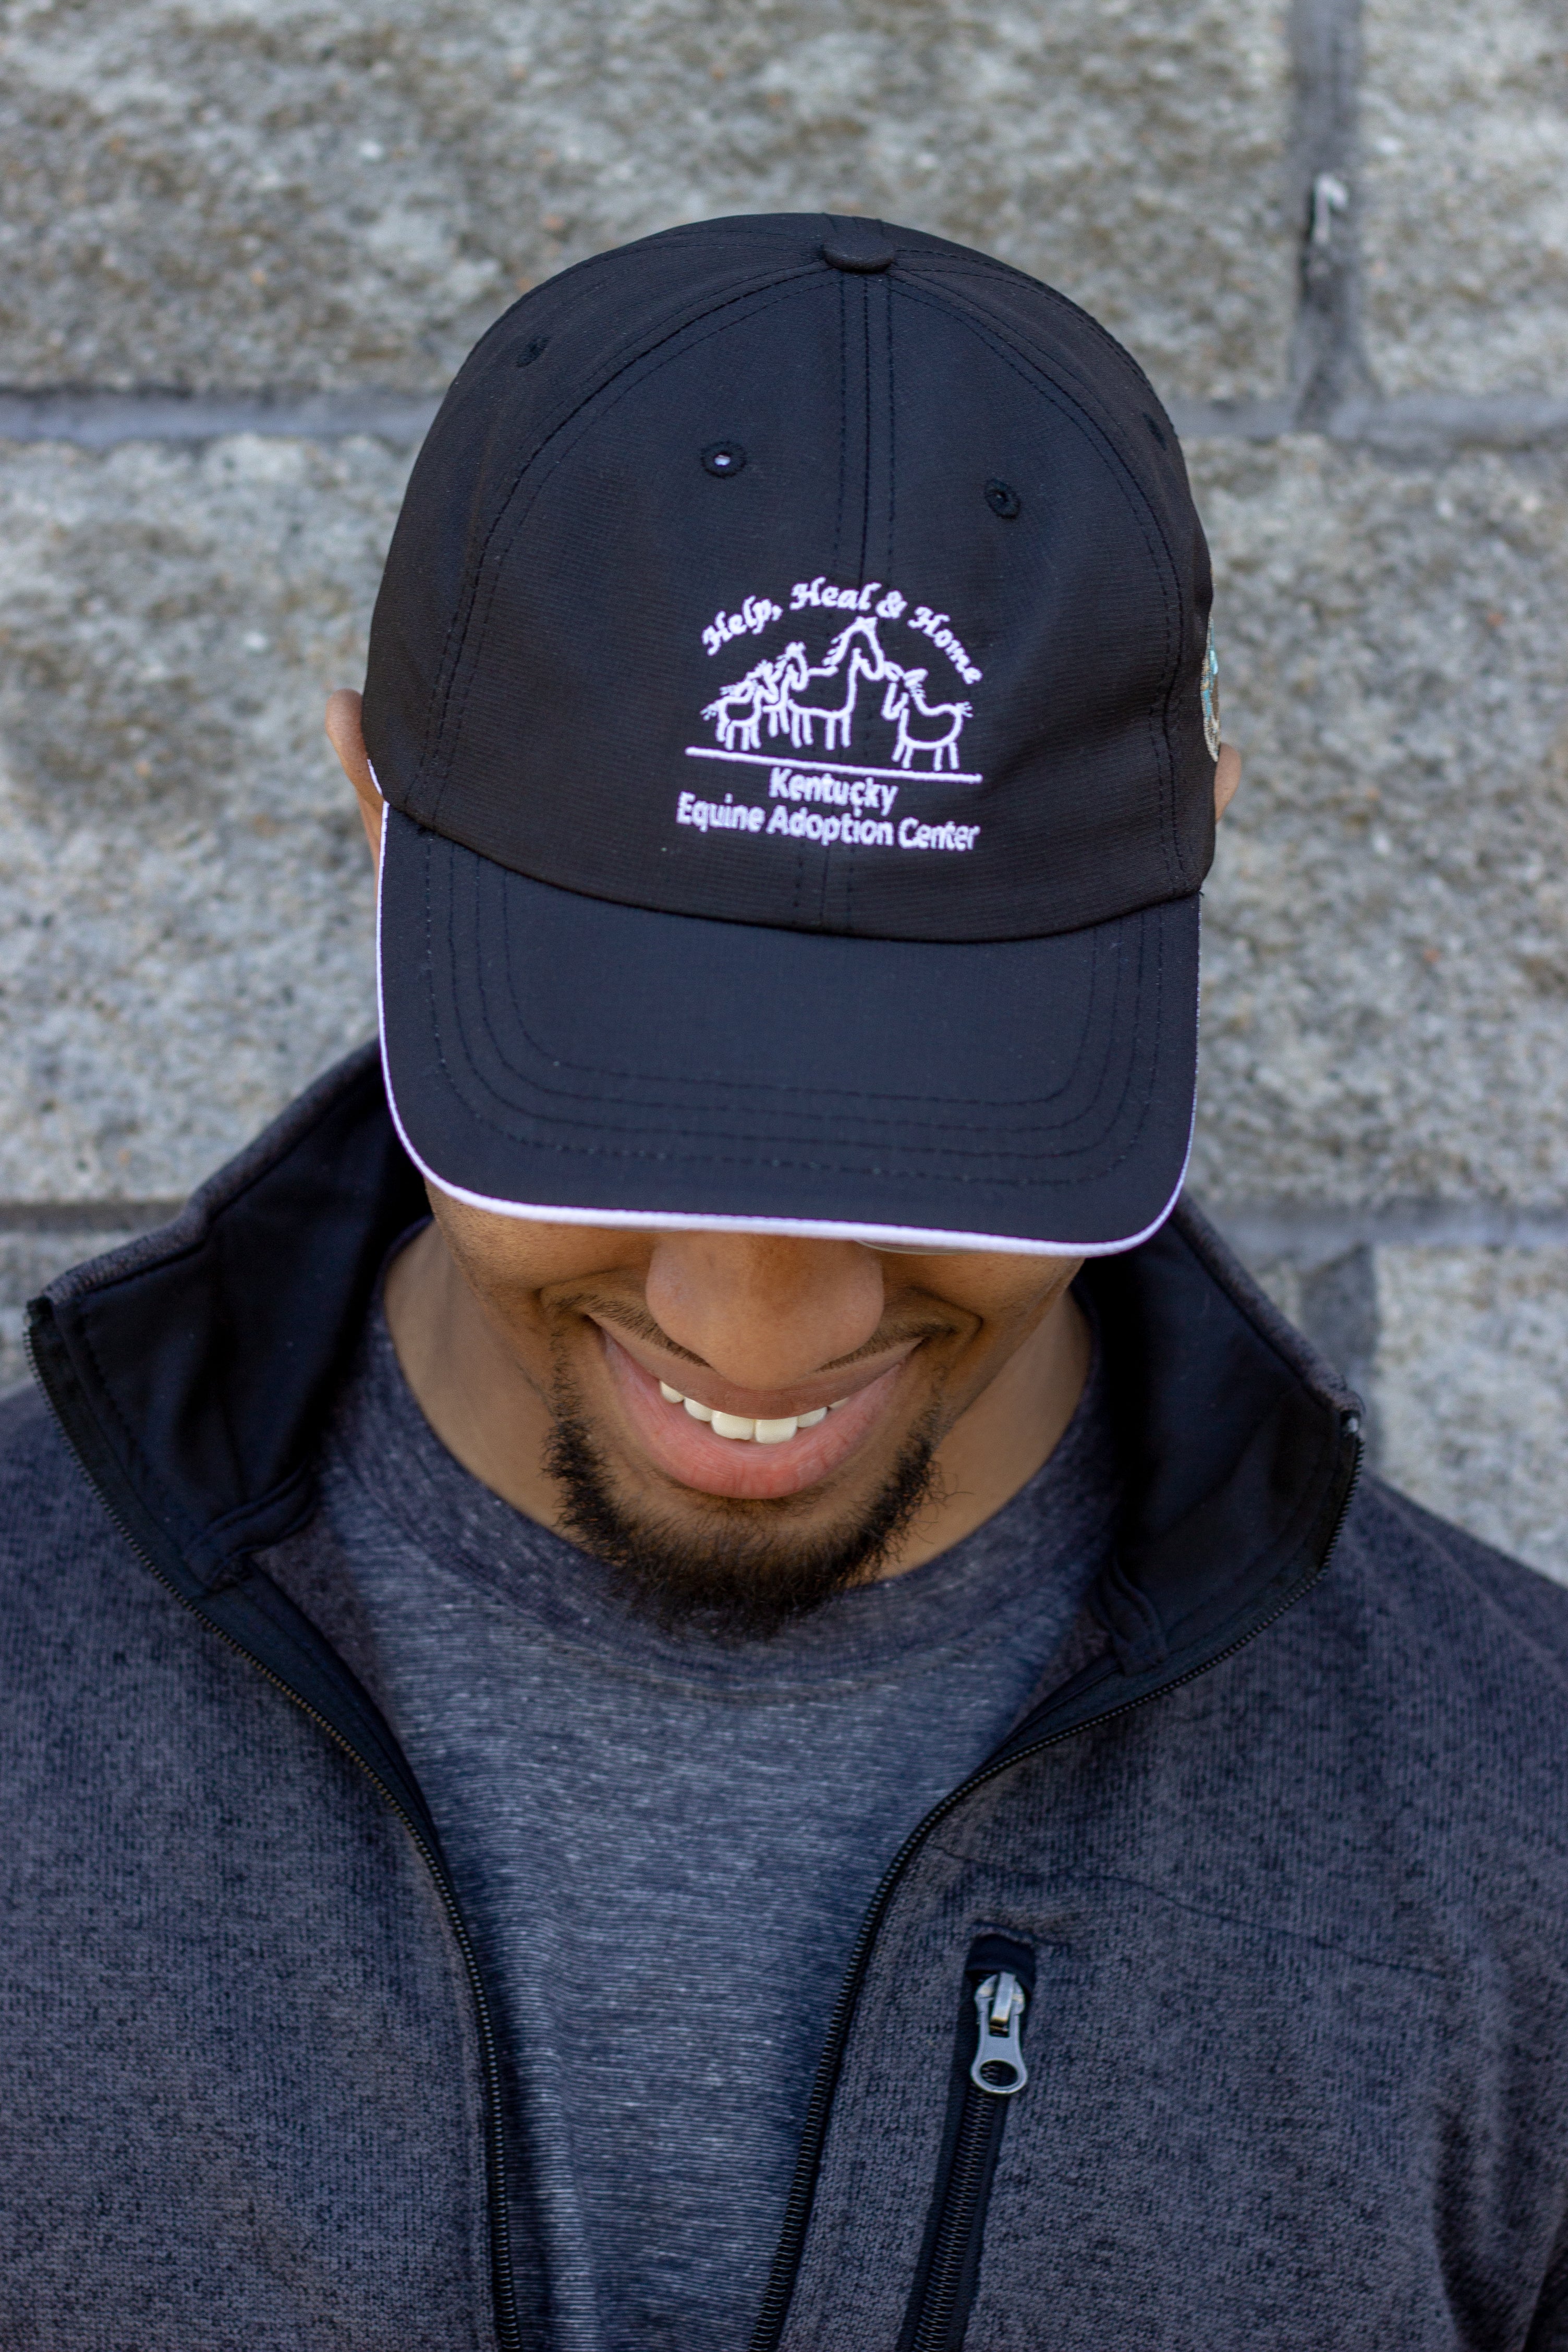 Kentucky Equine Adoption Center Horse Country hat